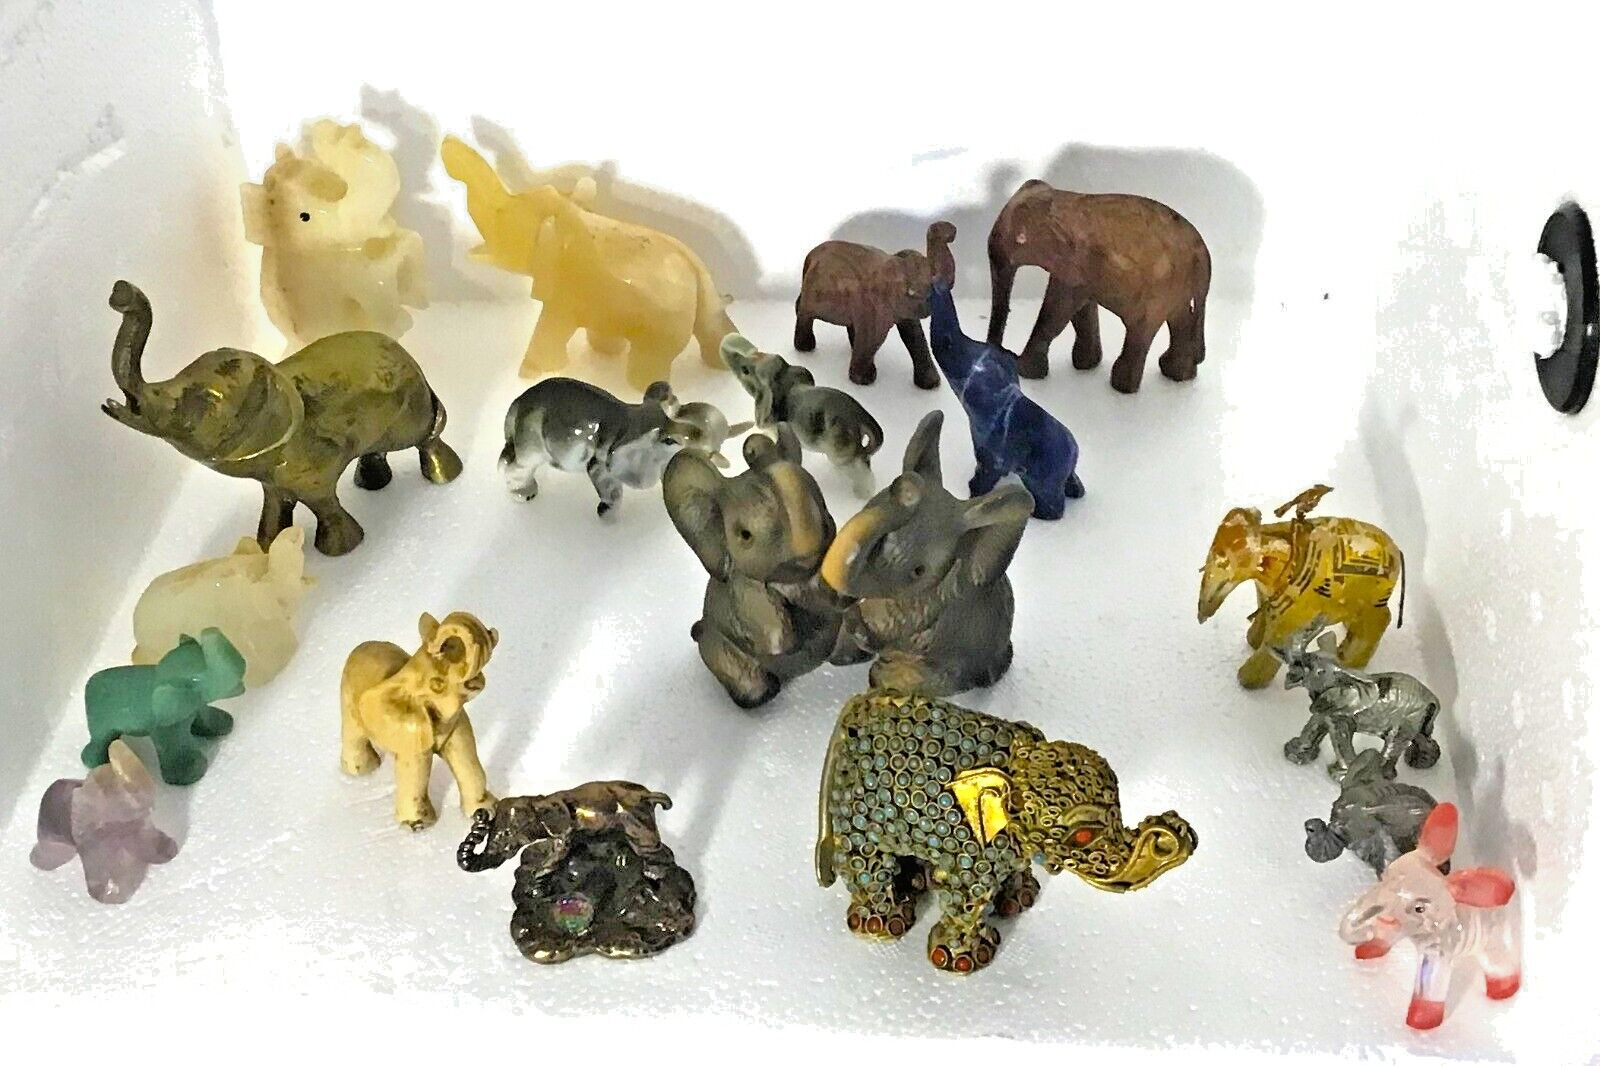 19 pc Collection of Vintage Ornate Elephant Figurines